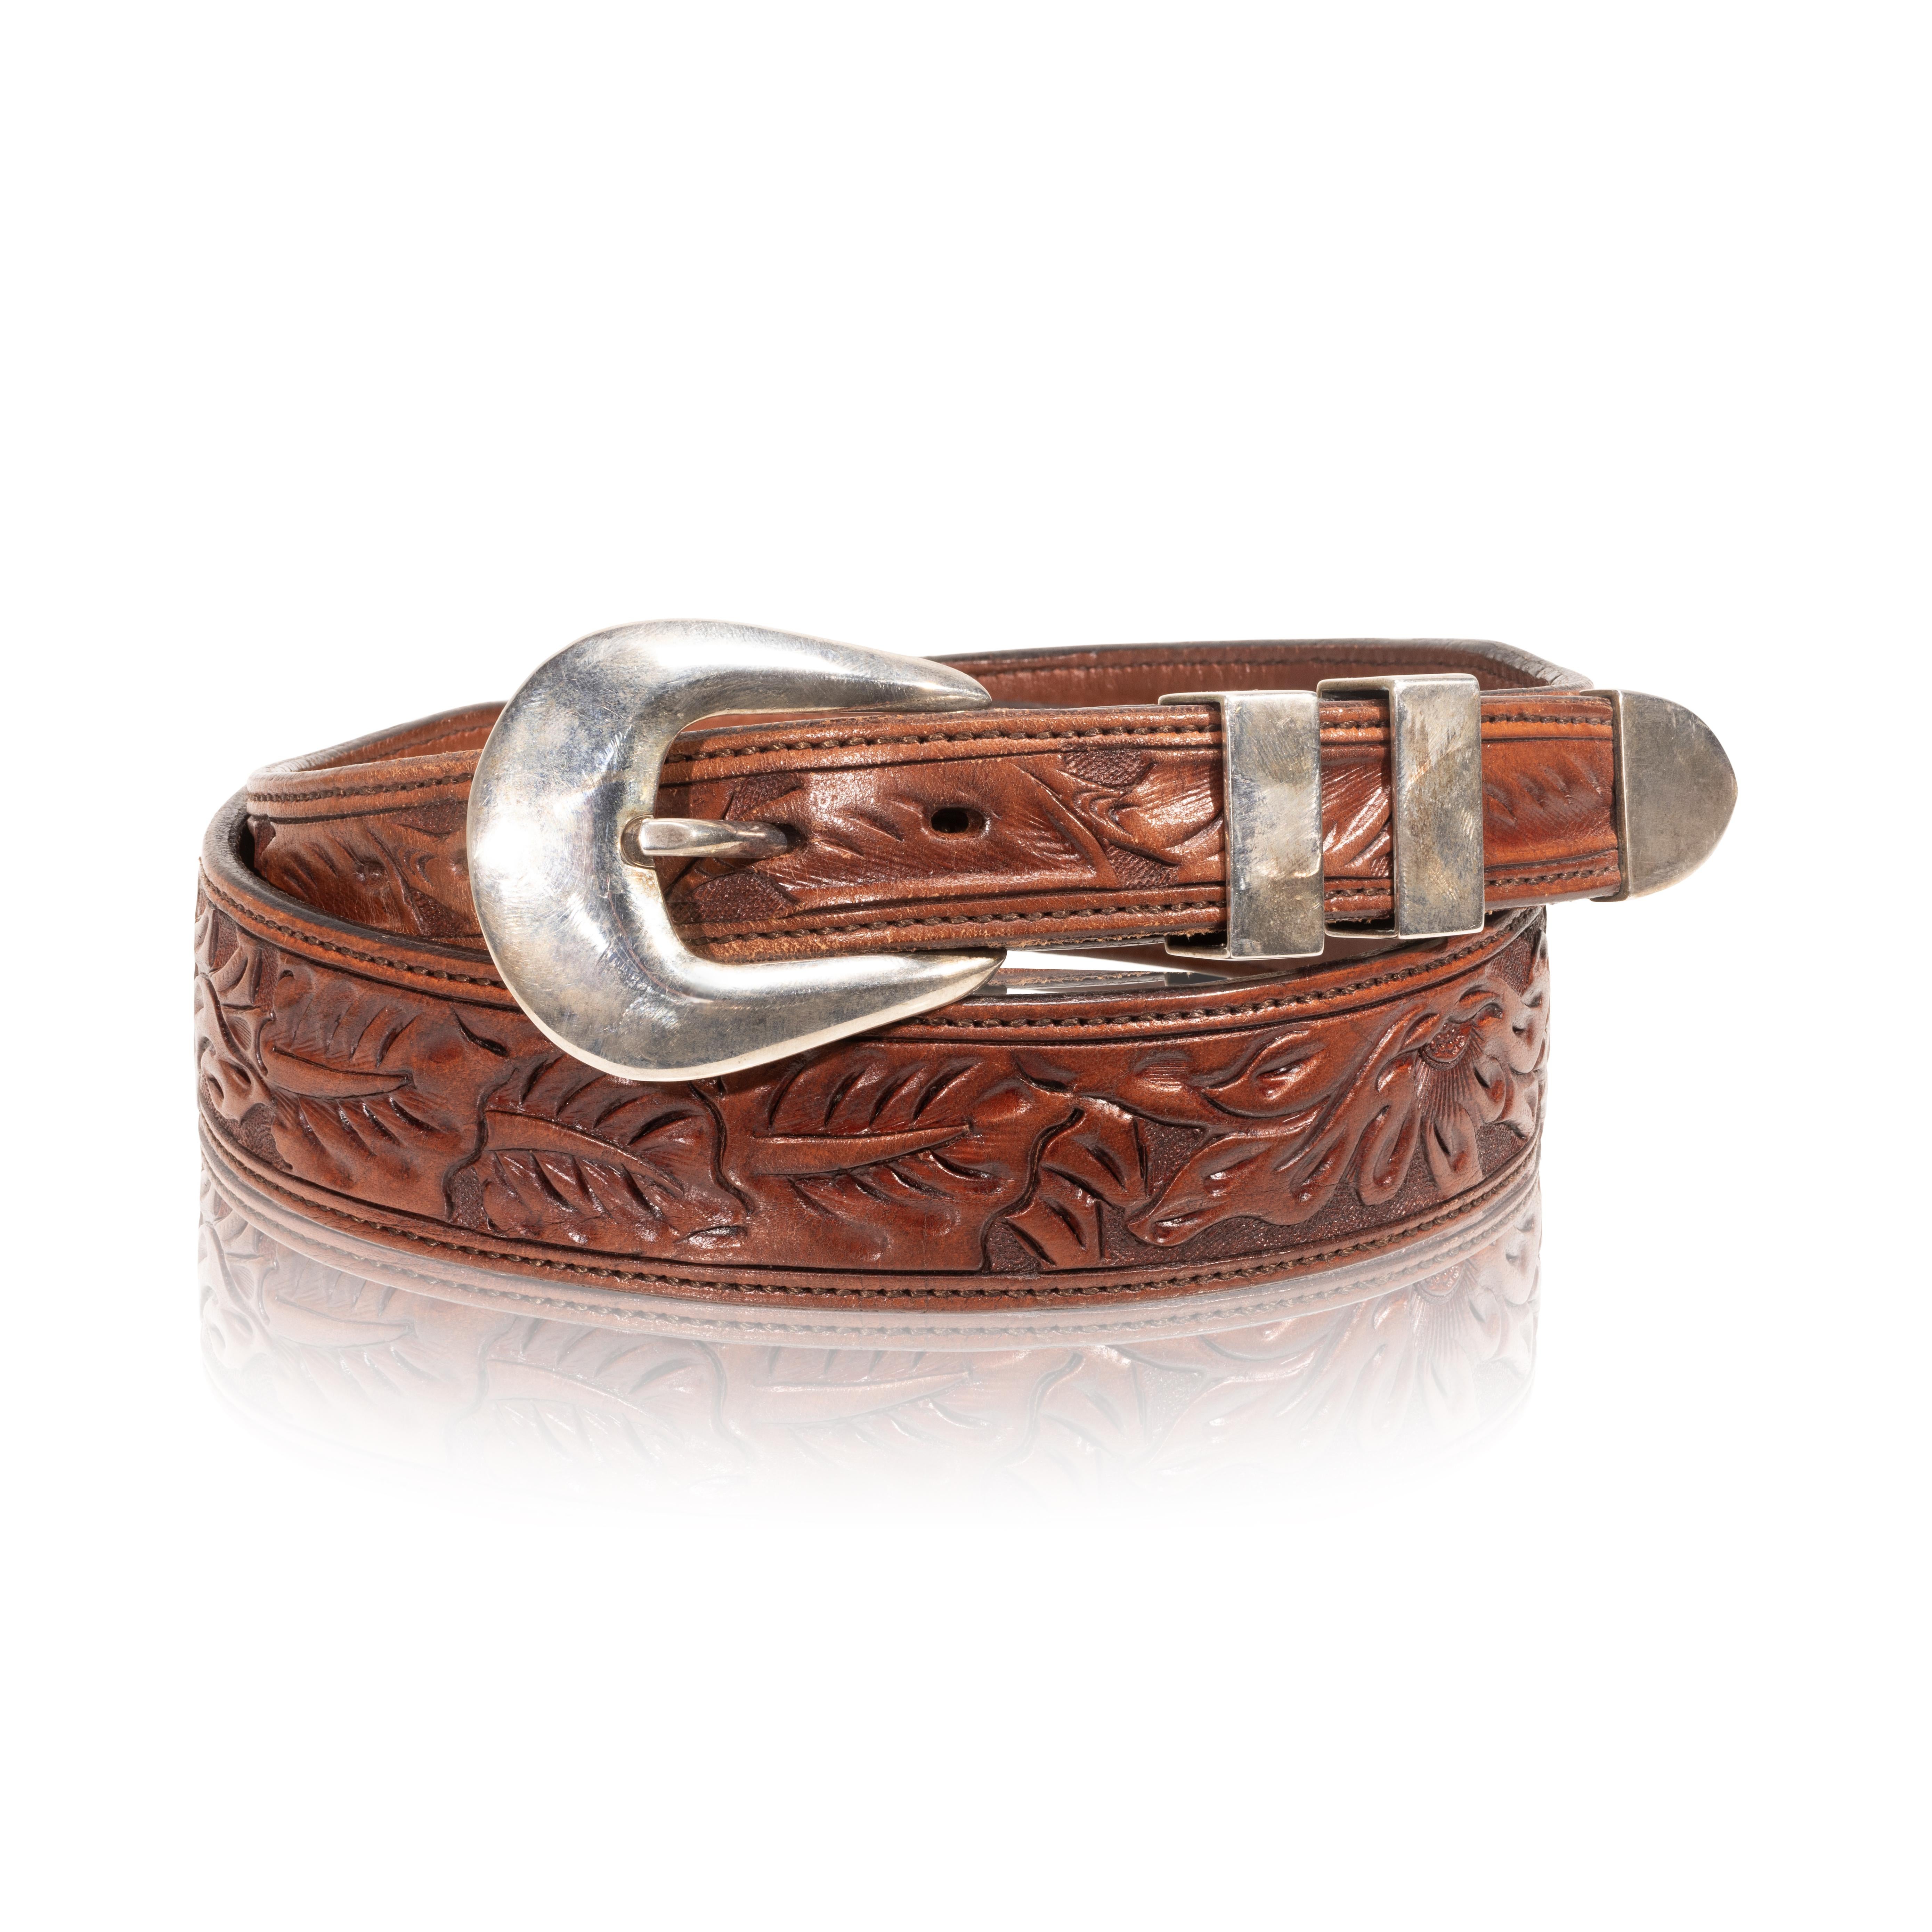 James Reid sterling buckle set on running oak tooled leather belt. Buckle loops and endpiece have no design other than highly polished surface. Stamped with James Reid signature hallmark on back. Buckle has very little patina, belt is in like new